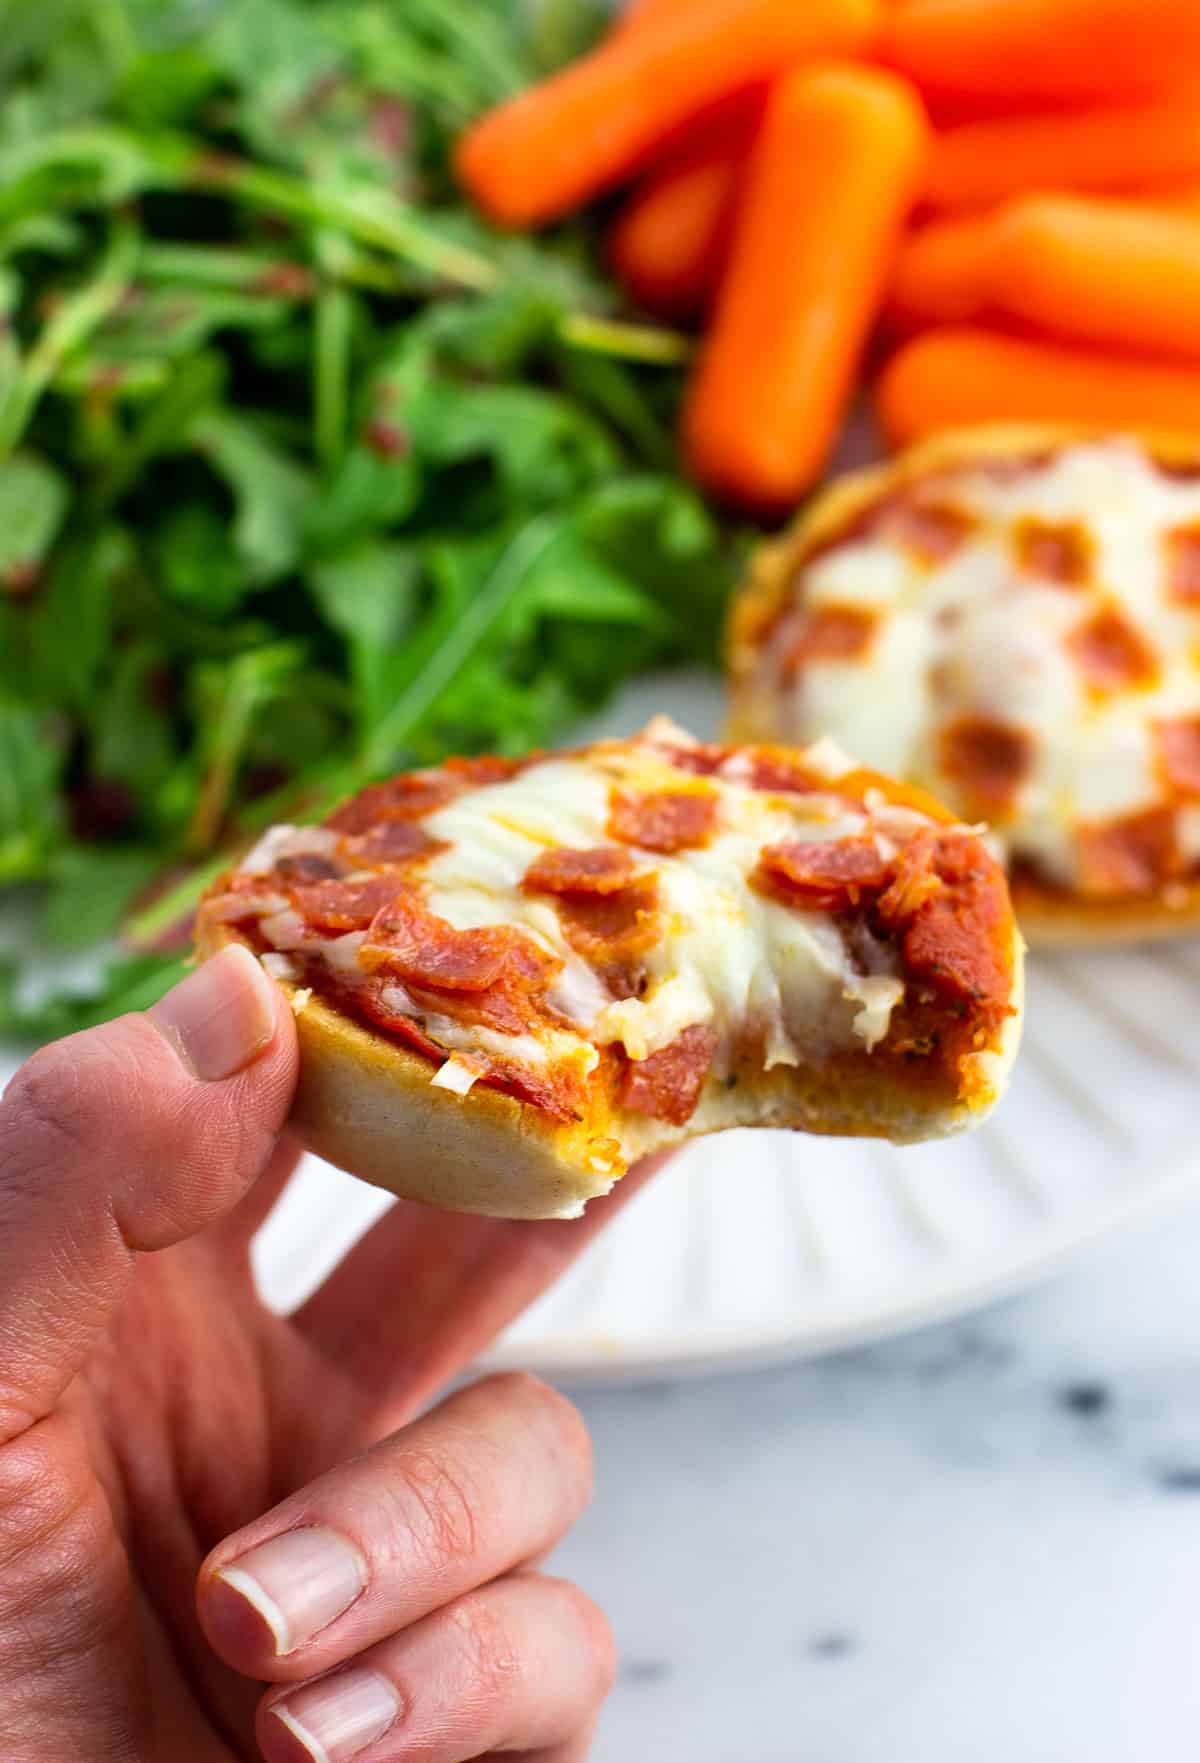 A hand holding up a mini pizza bagel in front of a plate of salad and carrots.